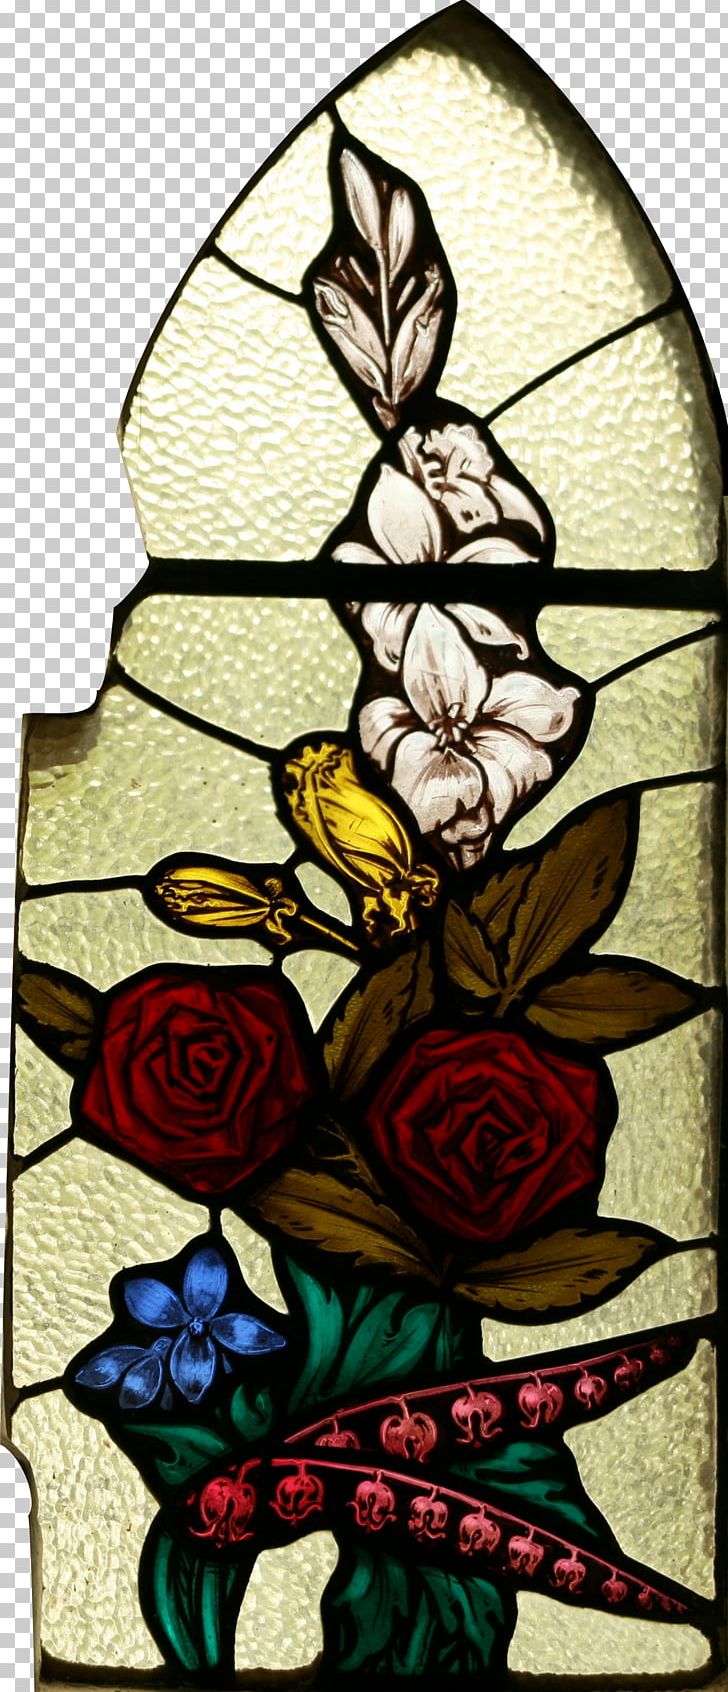 Stained Glass Flower Window PNG, Clipart, Flower, Stained Glass, Window Free PNG Download